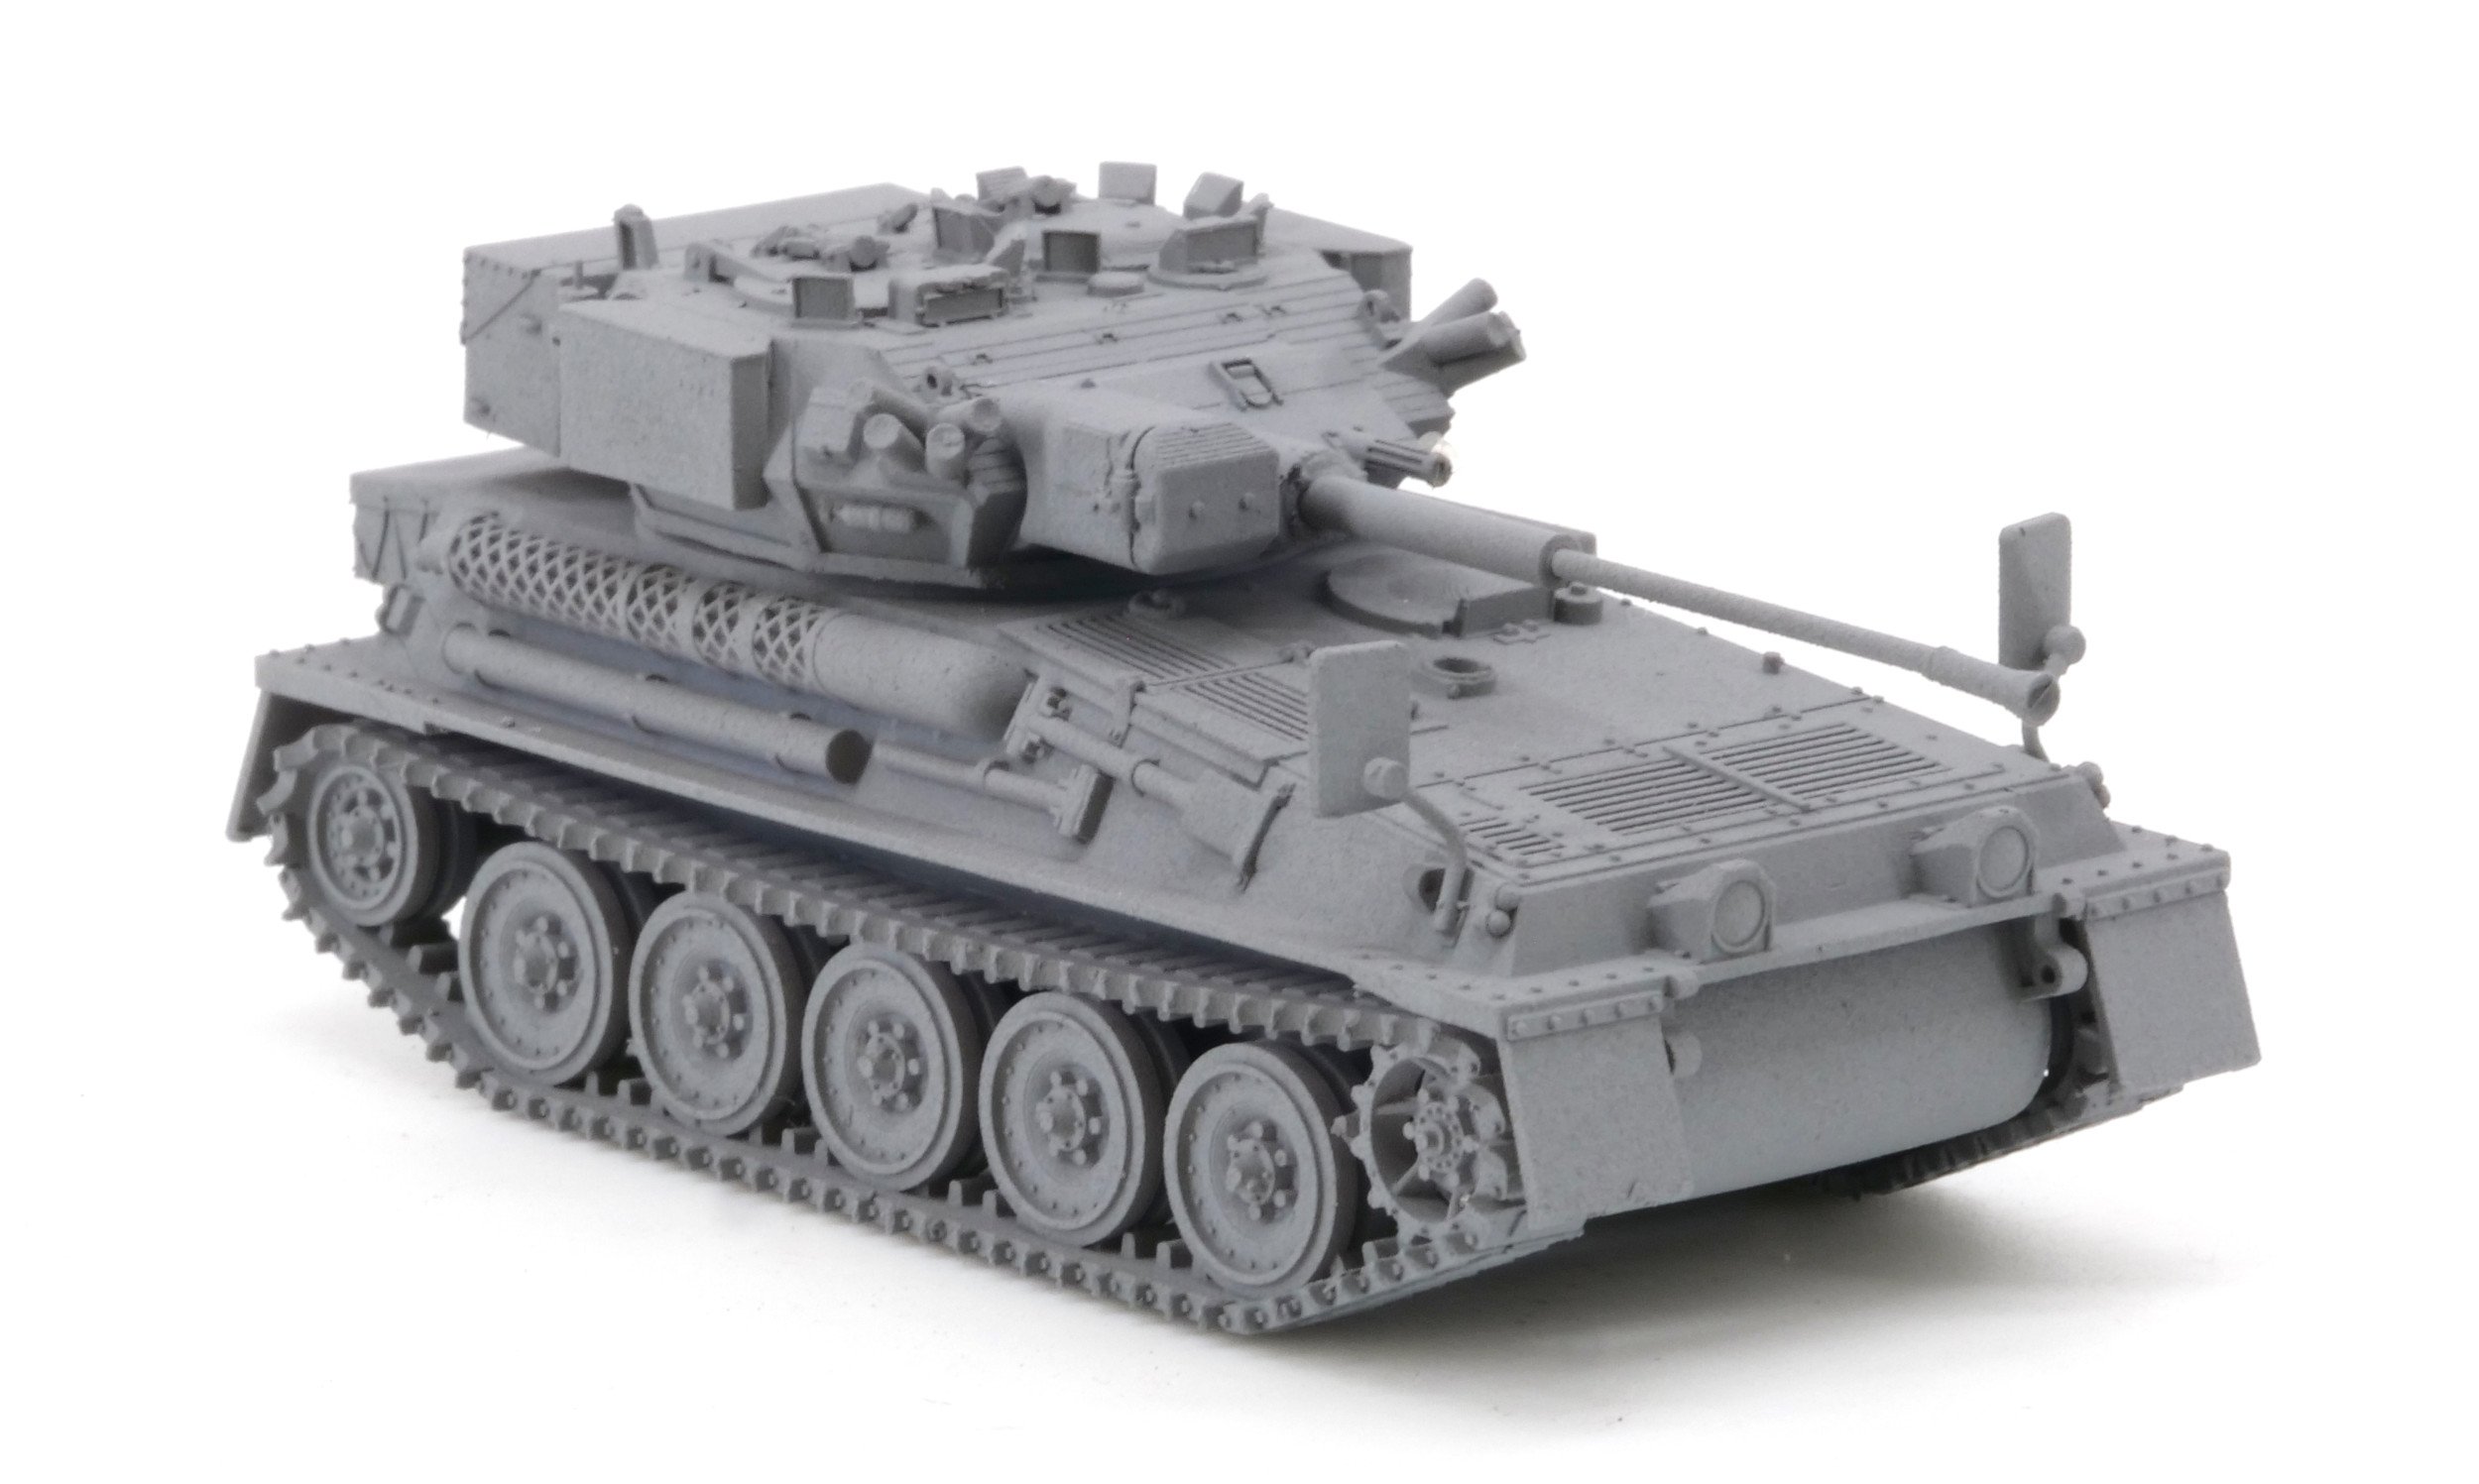 The FV107 Scimitar has a three piece barrel including a 3D printed suppressor. The main barrel is brass rod which is pre-cut to length in the kit.